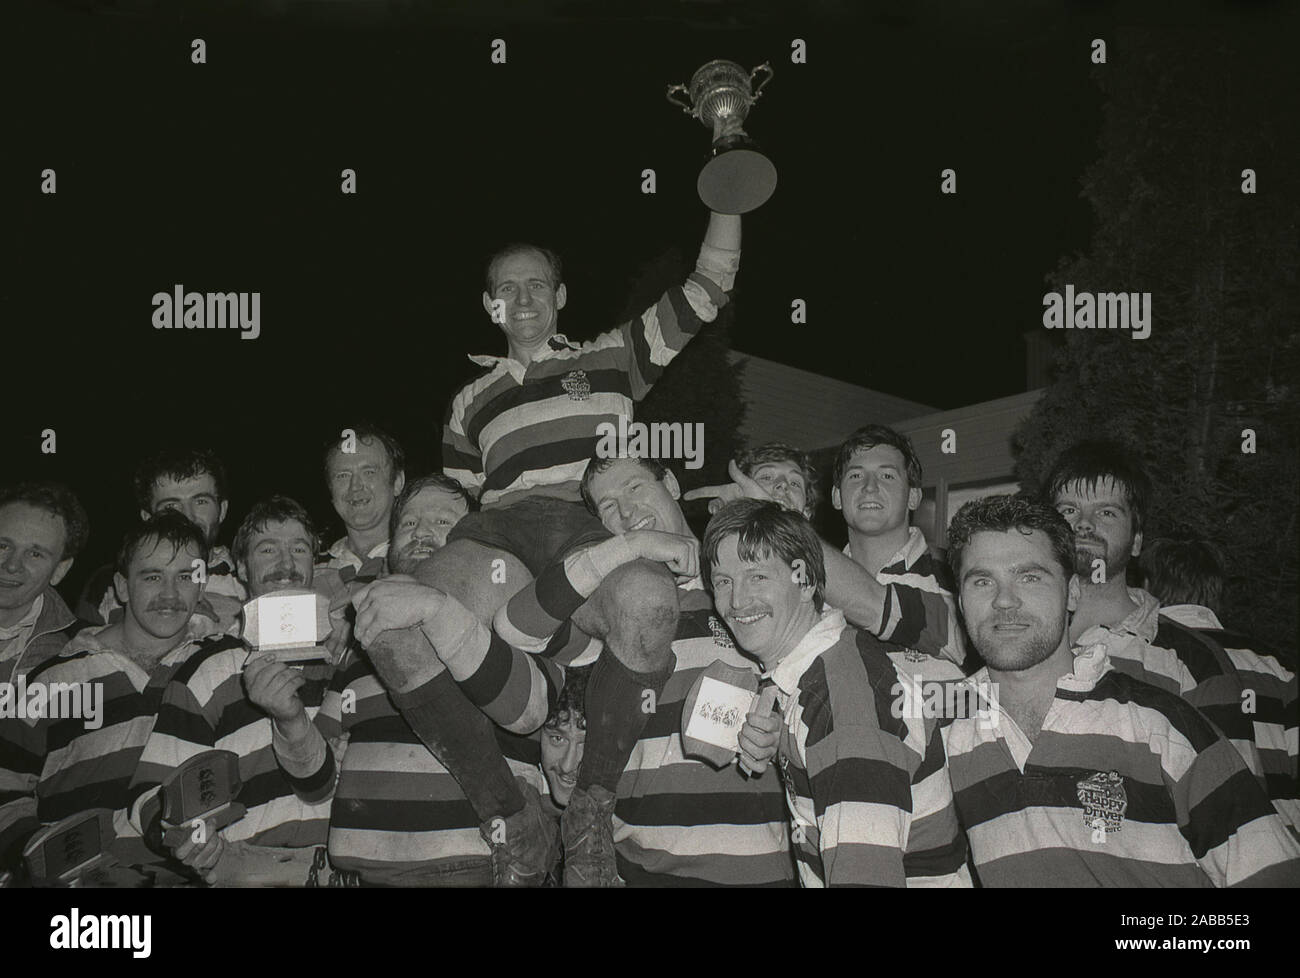 1980s, historical, winning captain holding the trophy being aloft by members of his team, after playing a night-time game of rugby union, England, UK. Stock Photo